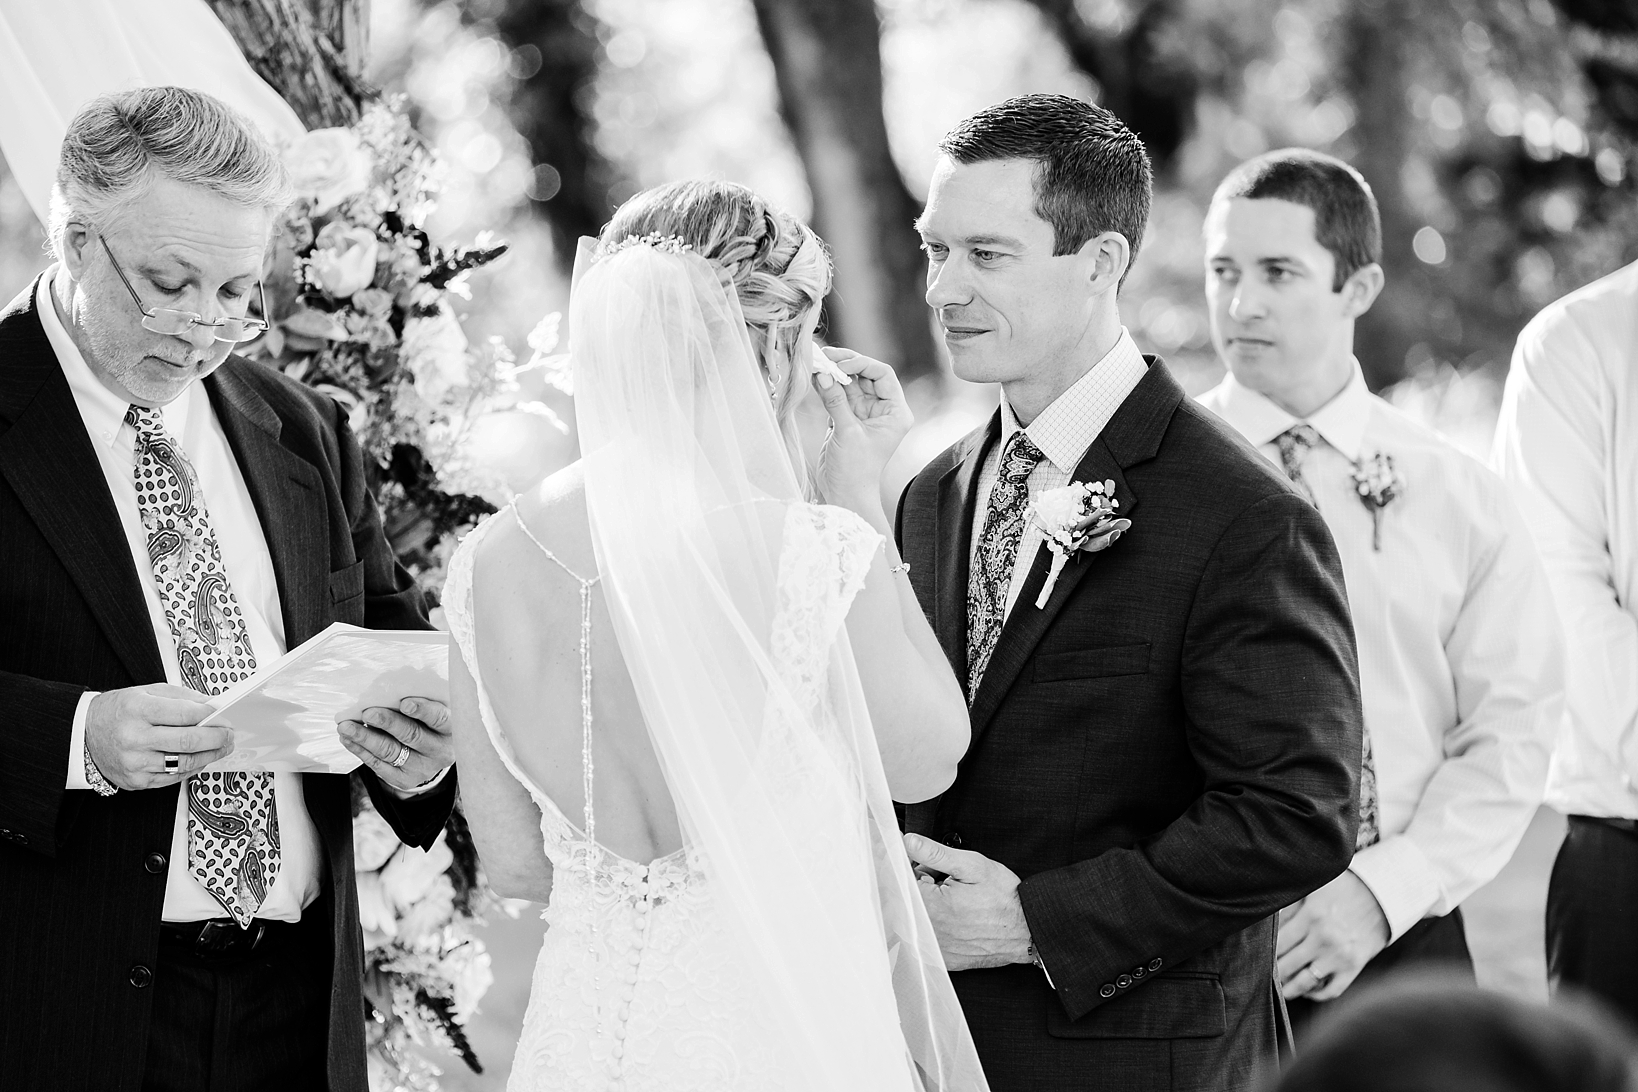 Black and white image of a Groom looking at his Bride during their wedding ceremony wipe away a tear